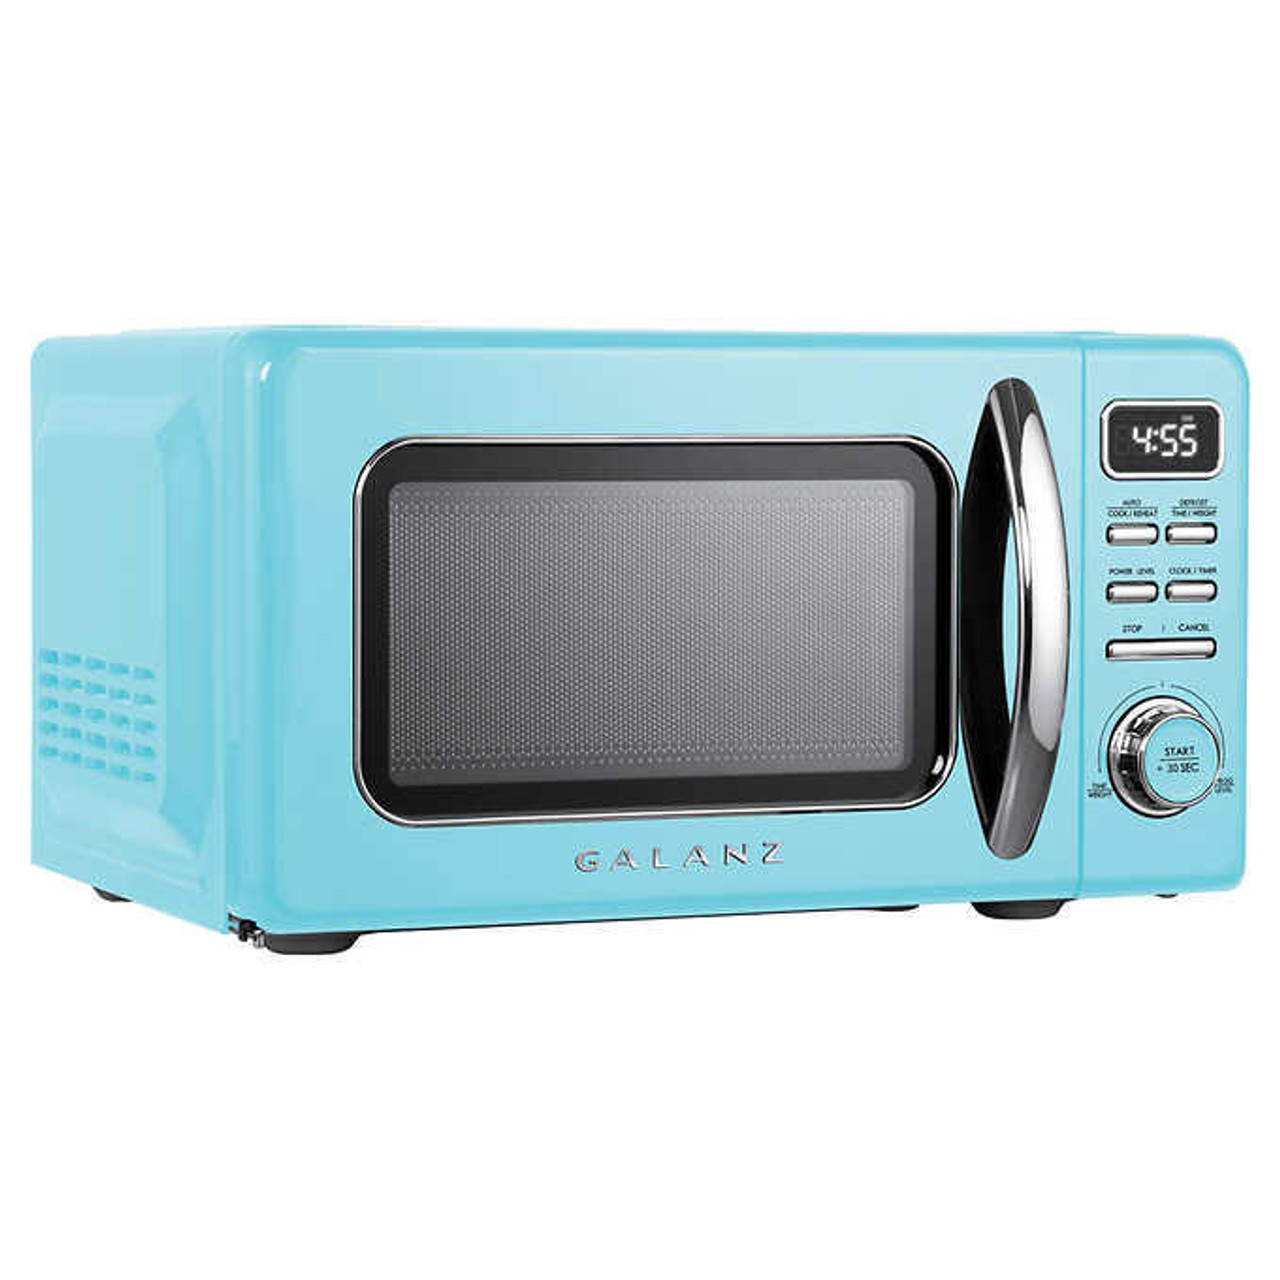 Galanz 0.7 cu. ft. Retro Microwave Oven - Vintage Style, Modern Convenience- Chicken Pieces